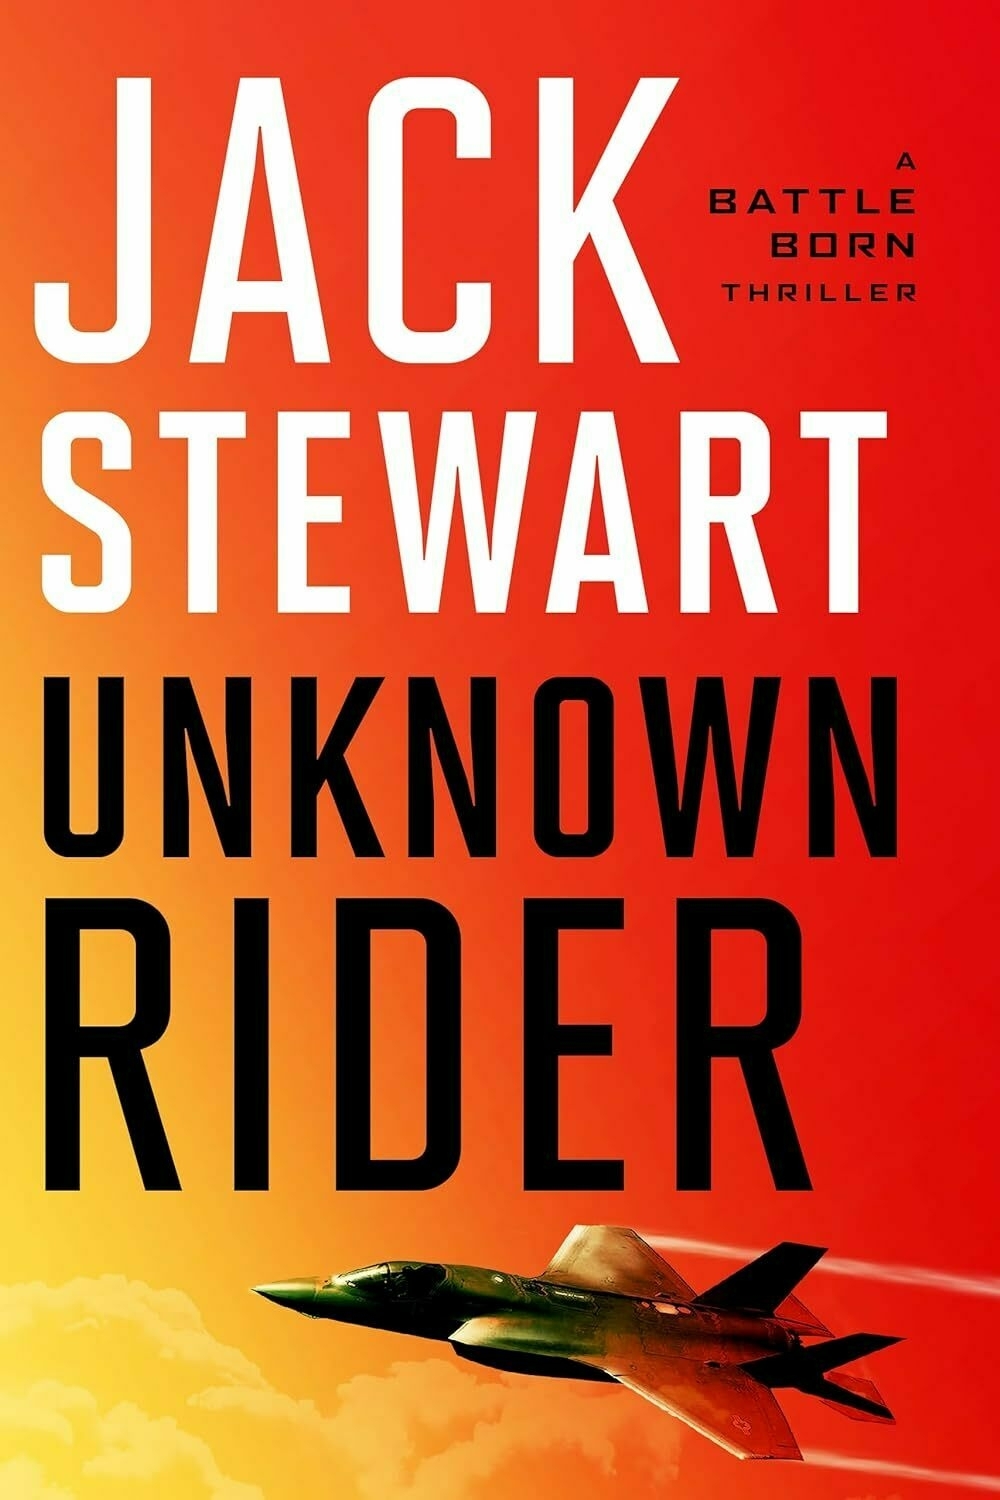 Cover art for Jack Stewart's book Unknown Rider